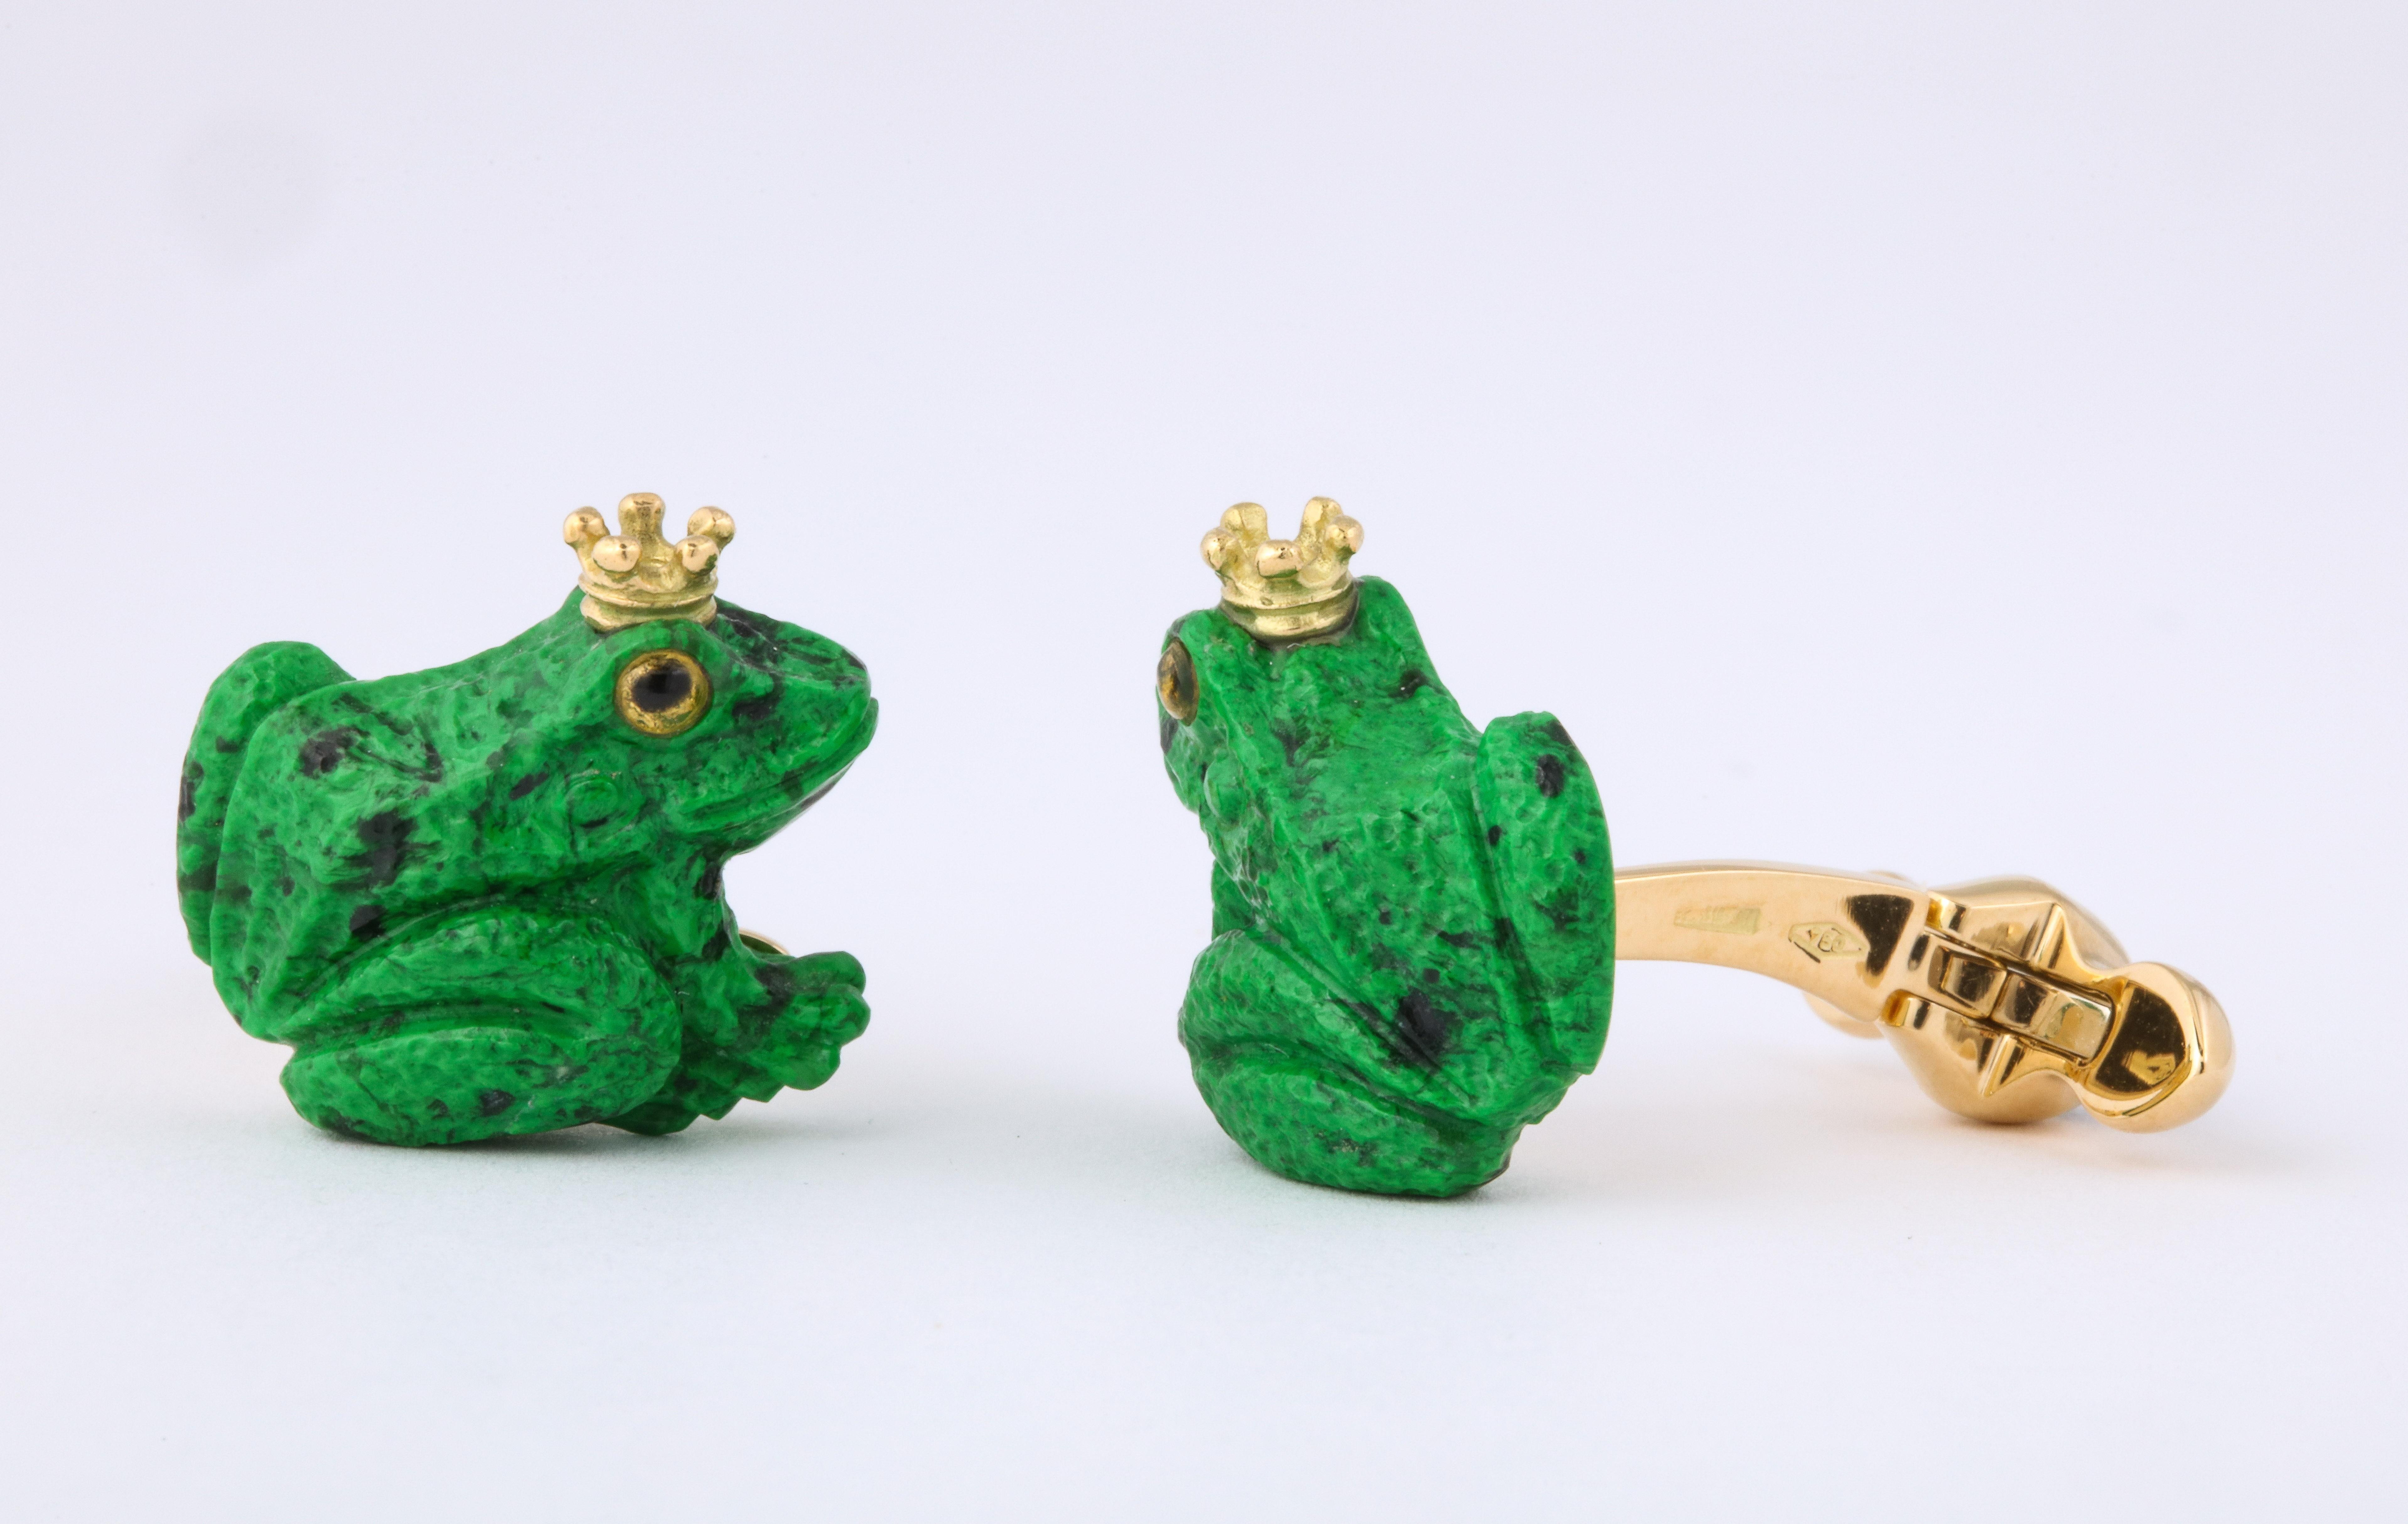 Cabochon Crowned Frog Cufflinks by Michael Kanners For Sale